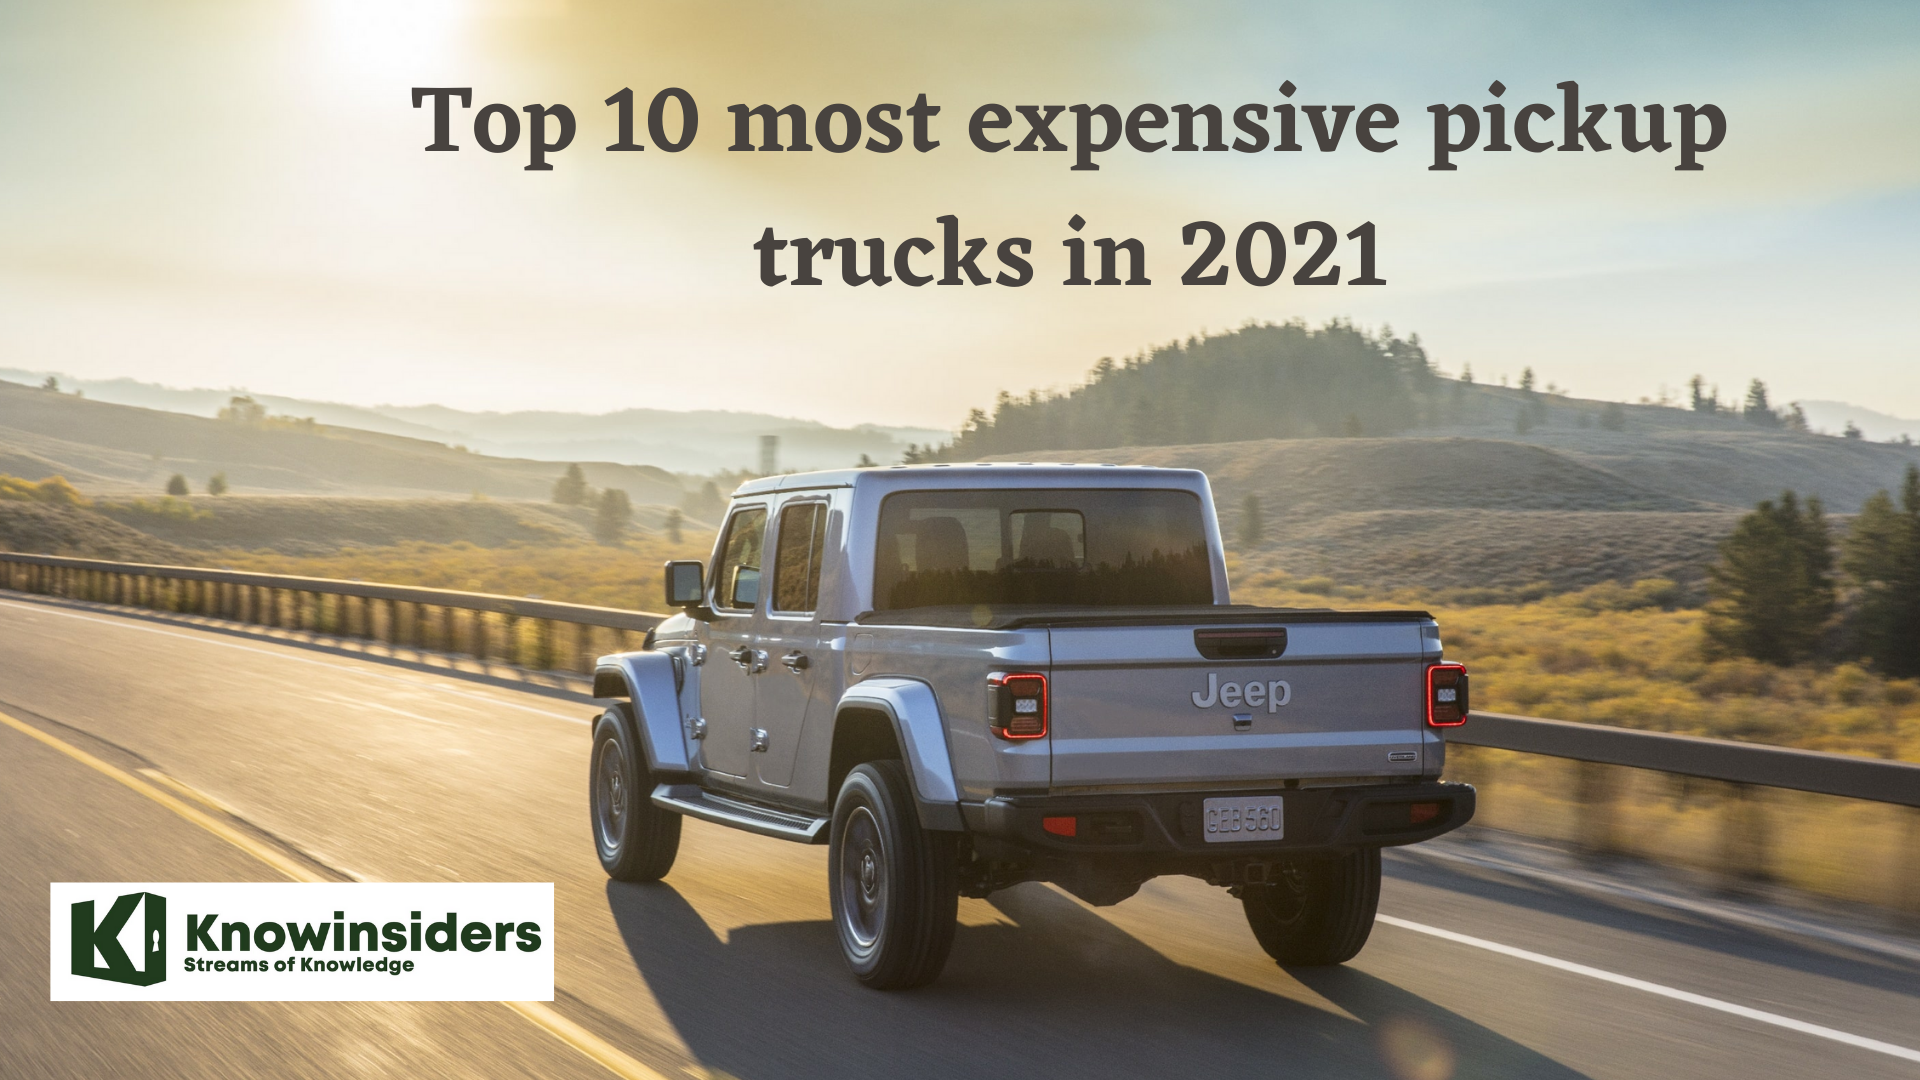 Top 10 Pickup Trucks – Most Expensive In 2021